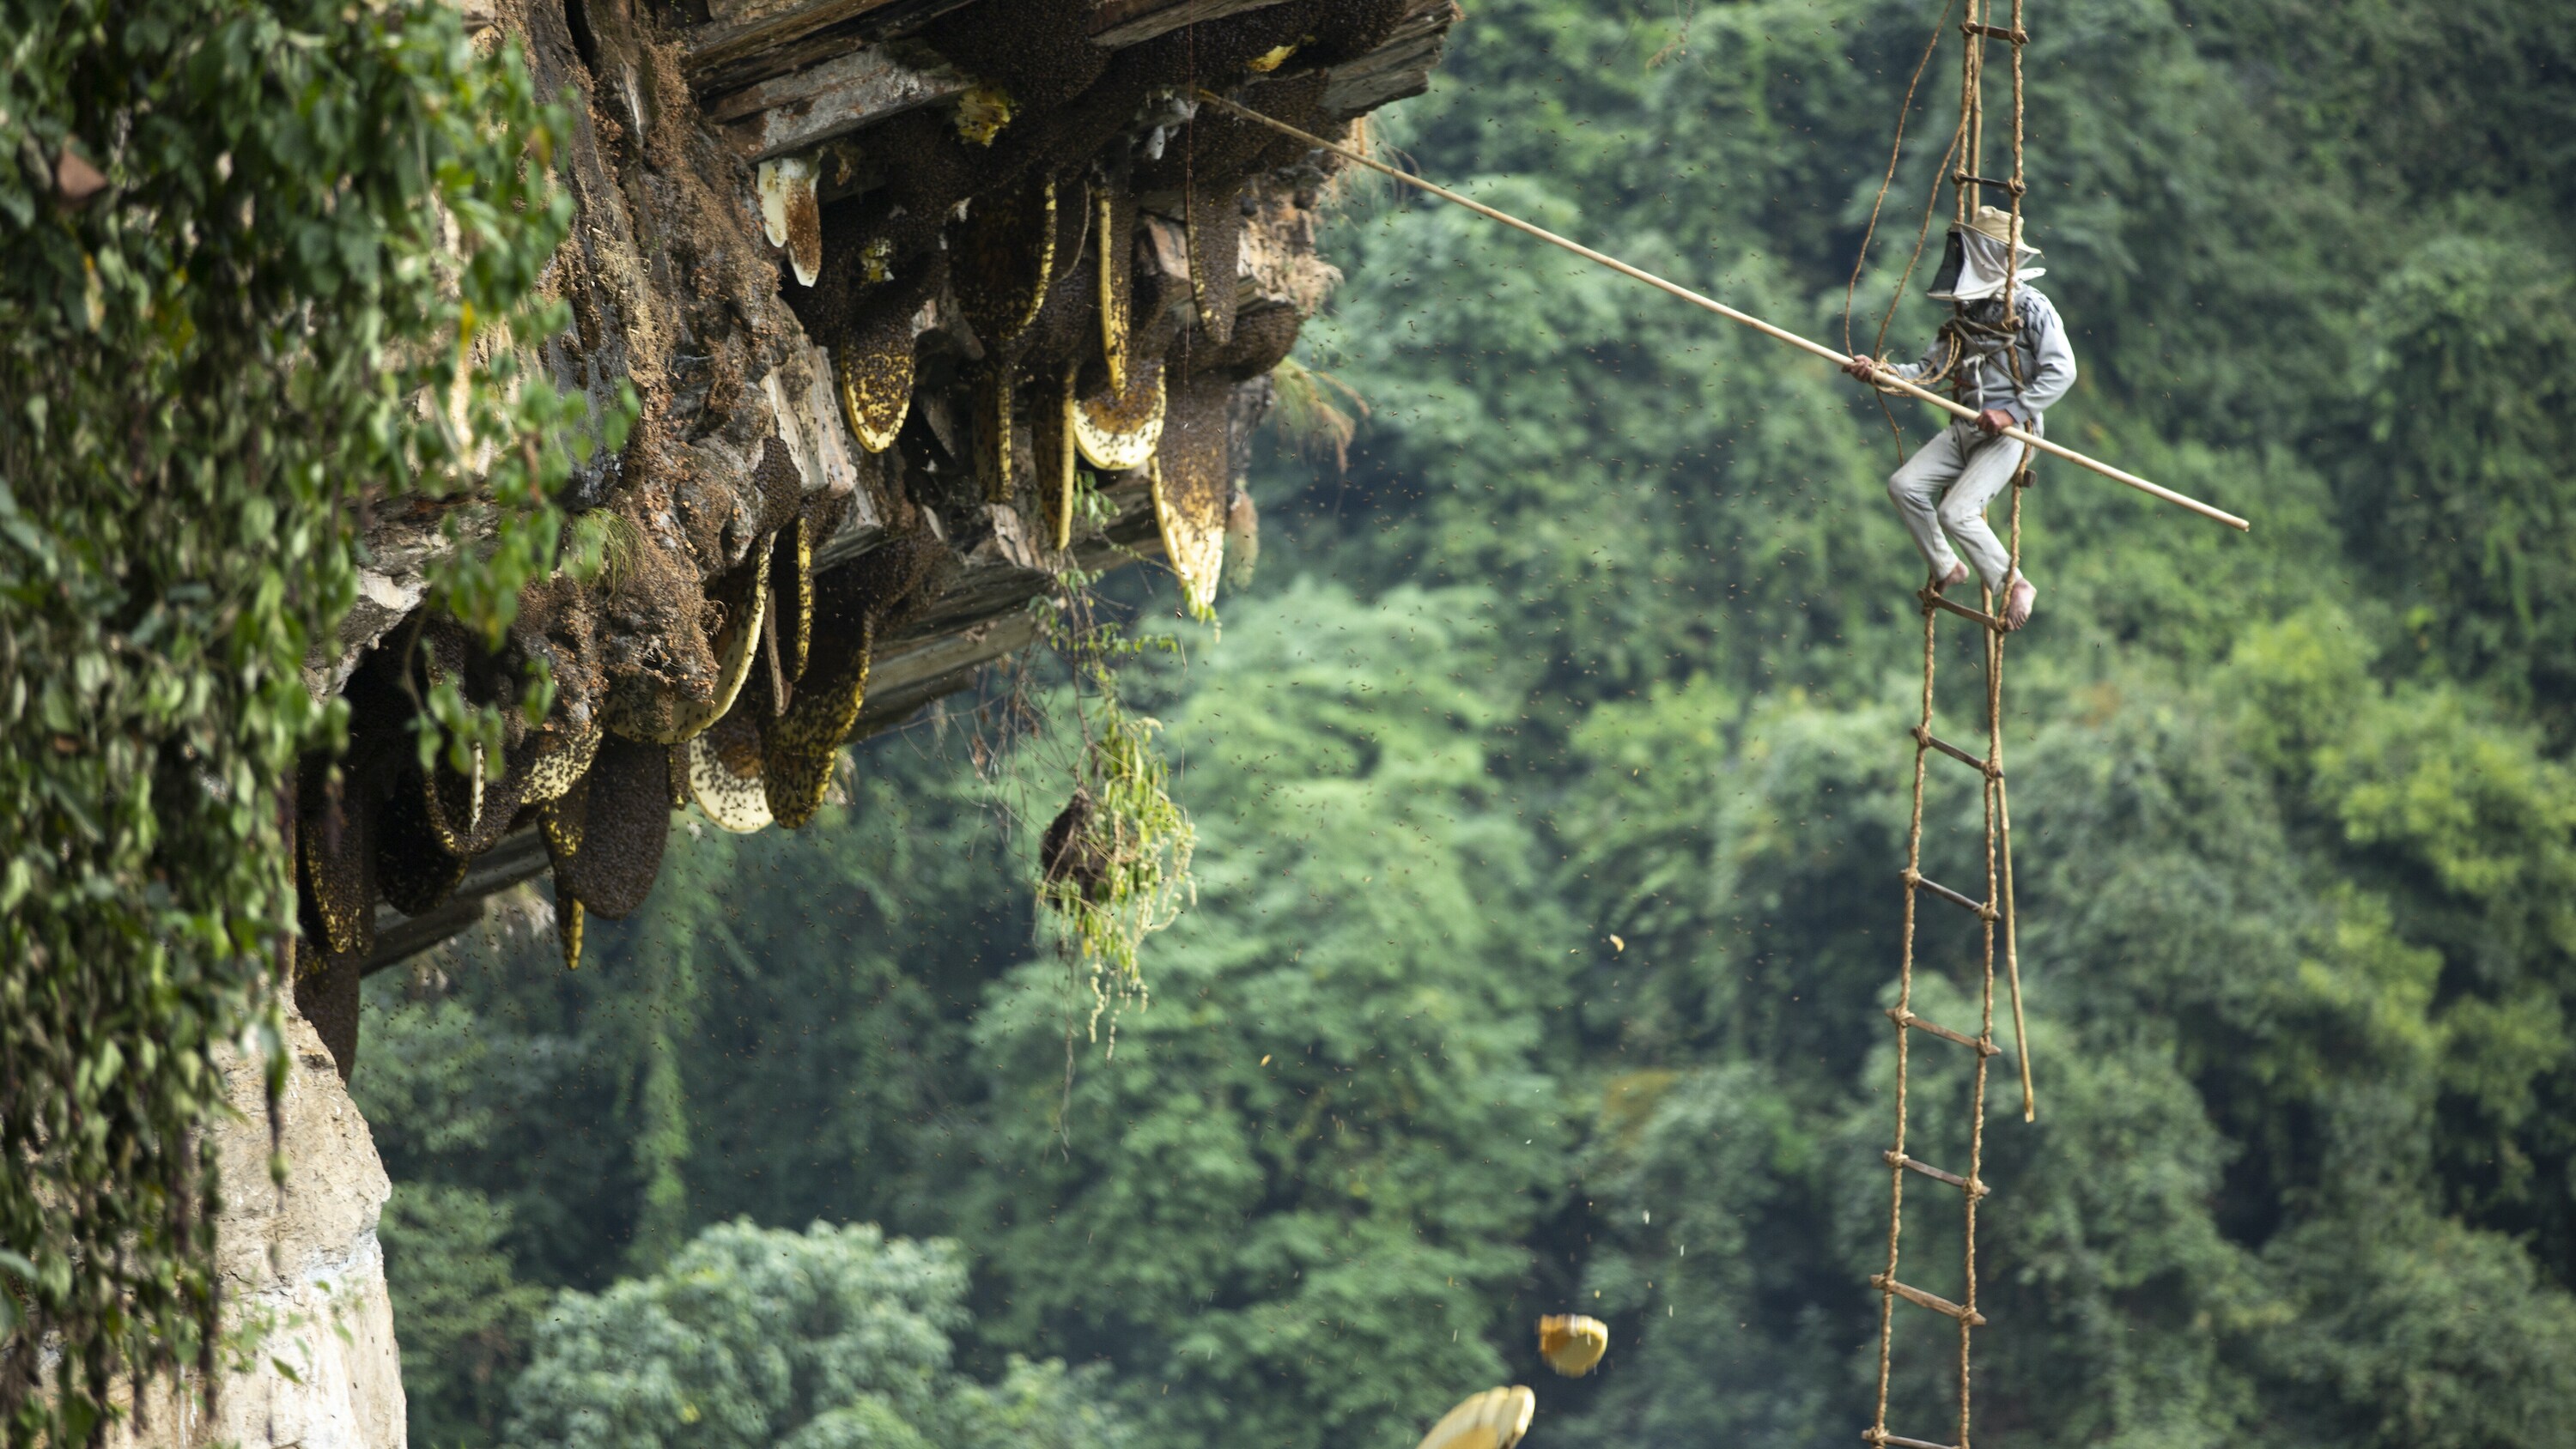 The first hive of honey falls to the ground as Honey Hunter, Lal Prasad Jaisi, deftly reaches beneath the overhang with his specially designed tools. (National Geographic/Bhim Thapa)